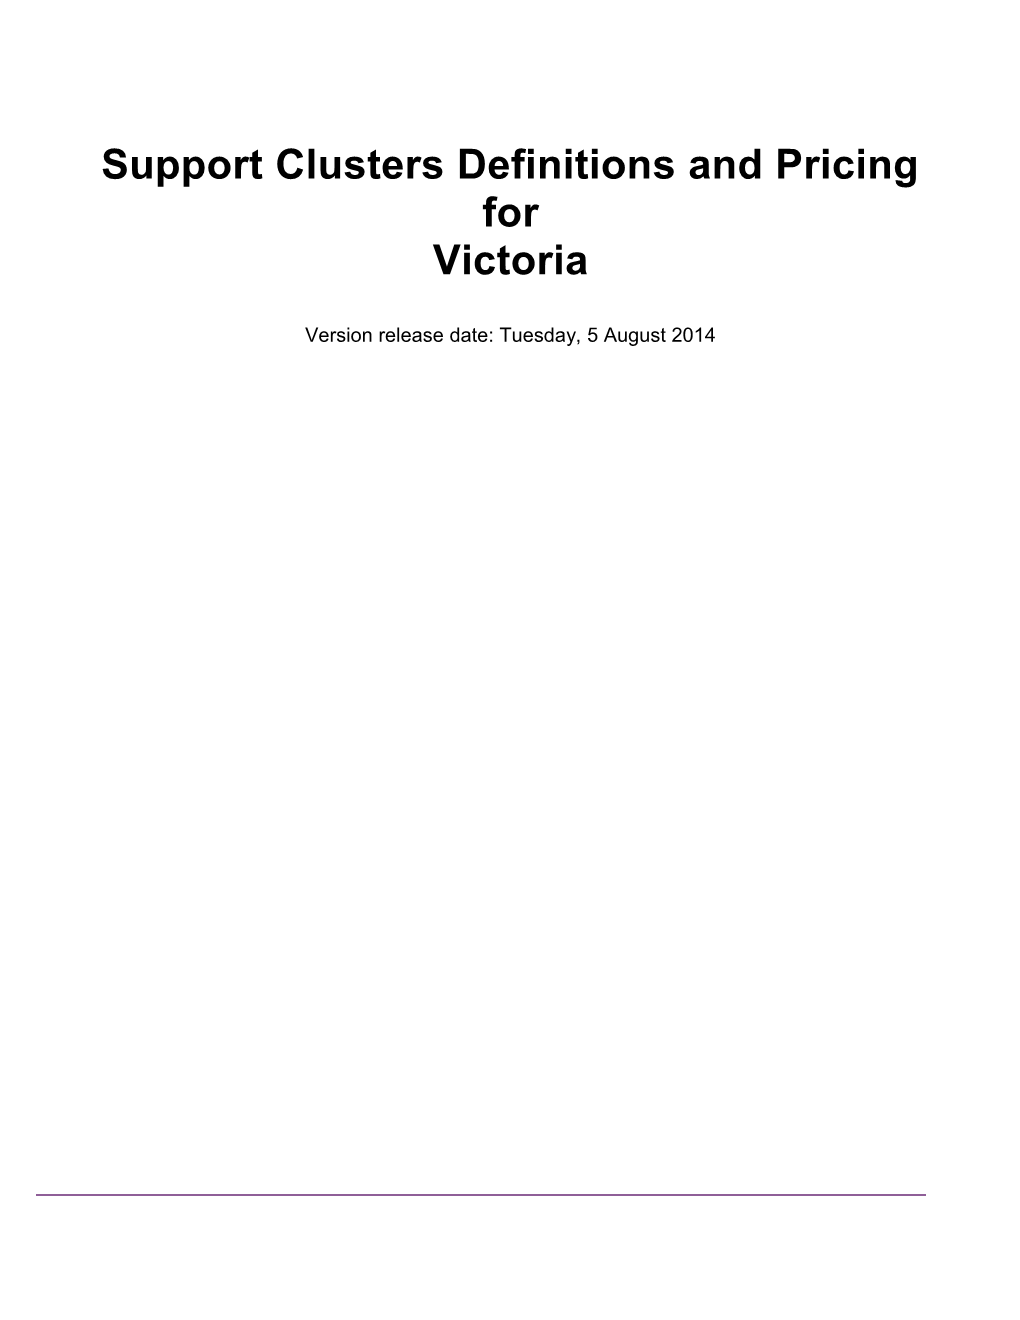 Support Clusters Definitions and Pricing for Victoria